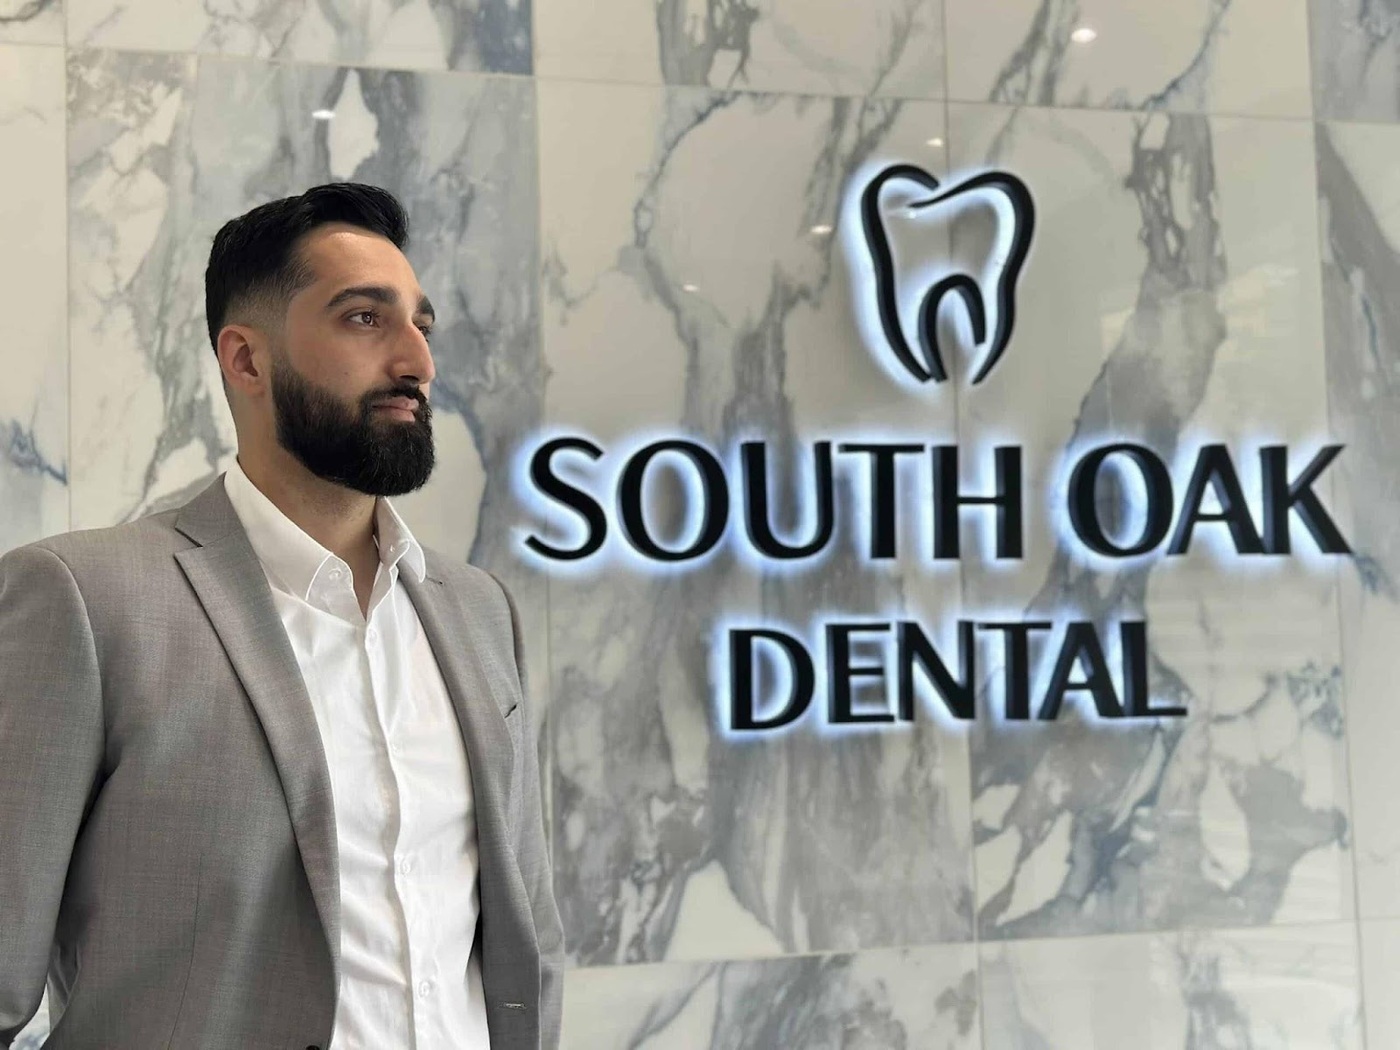 South Oak Dental is dedicated to providing exceptional dental care to the community of Oakville, Ontario, and beyond.